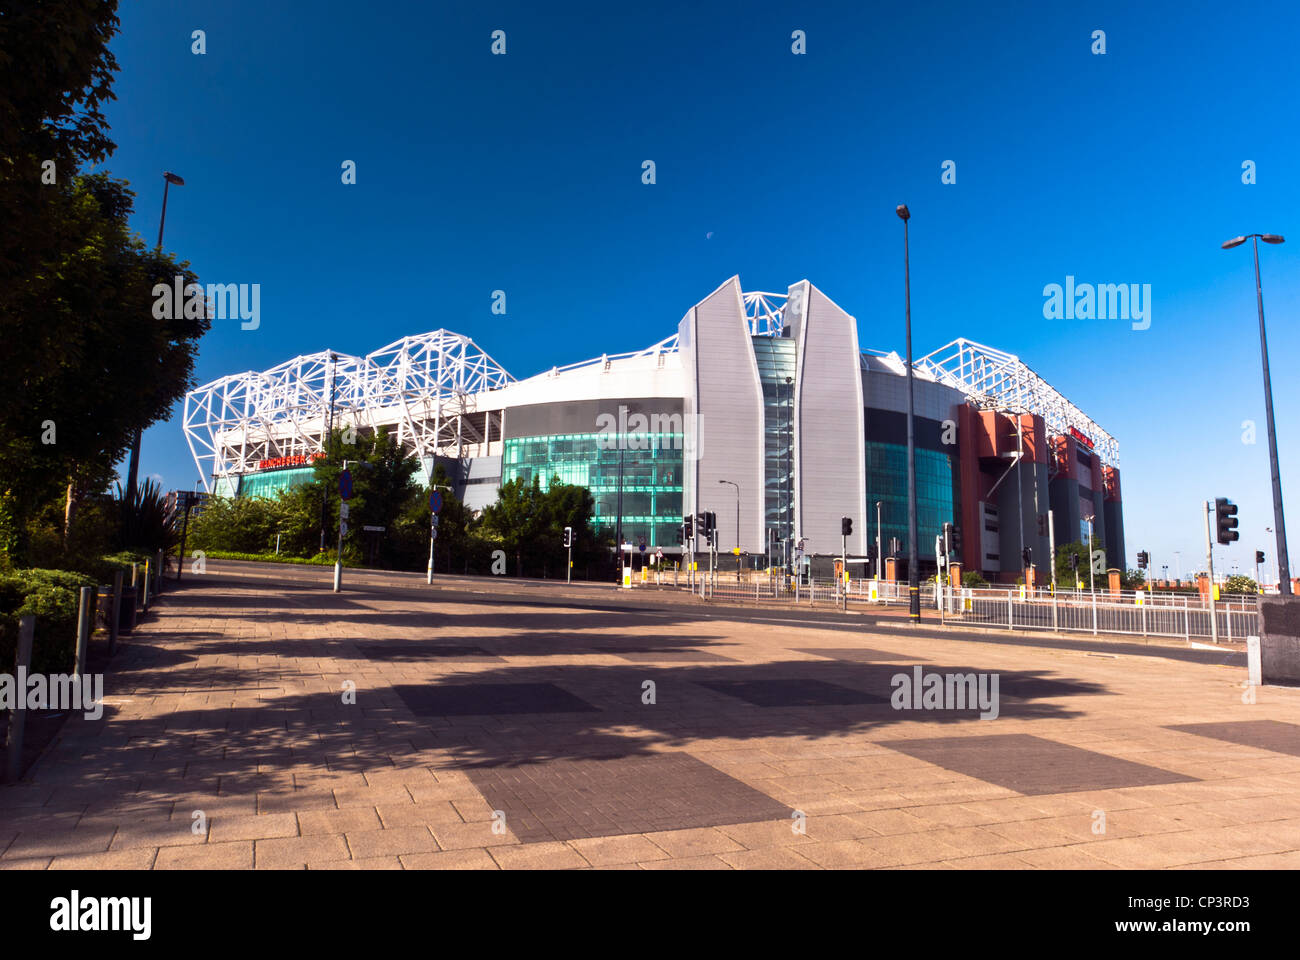 Manchester United football ground 'Old Trafford', Manchester, England, UK Stock Photo